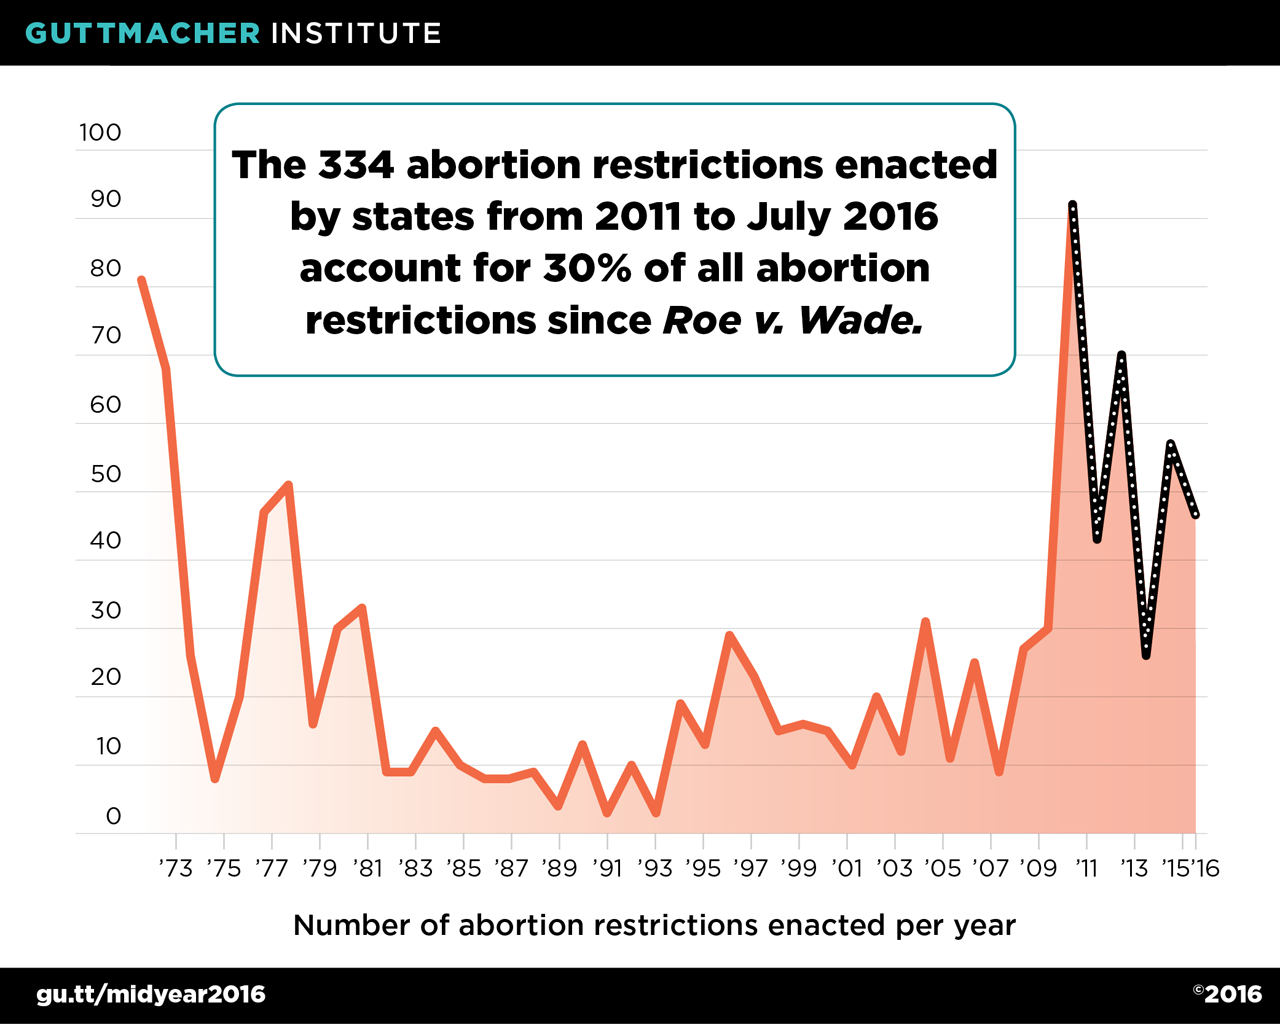 The 334 abortion restrictions enacted by states from 2011 to July 2016 account for 30% of all abortion restrictions since Roe v. Wade.